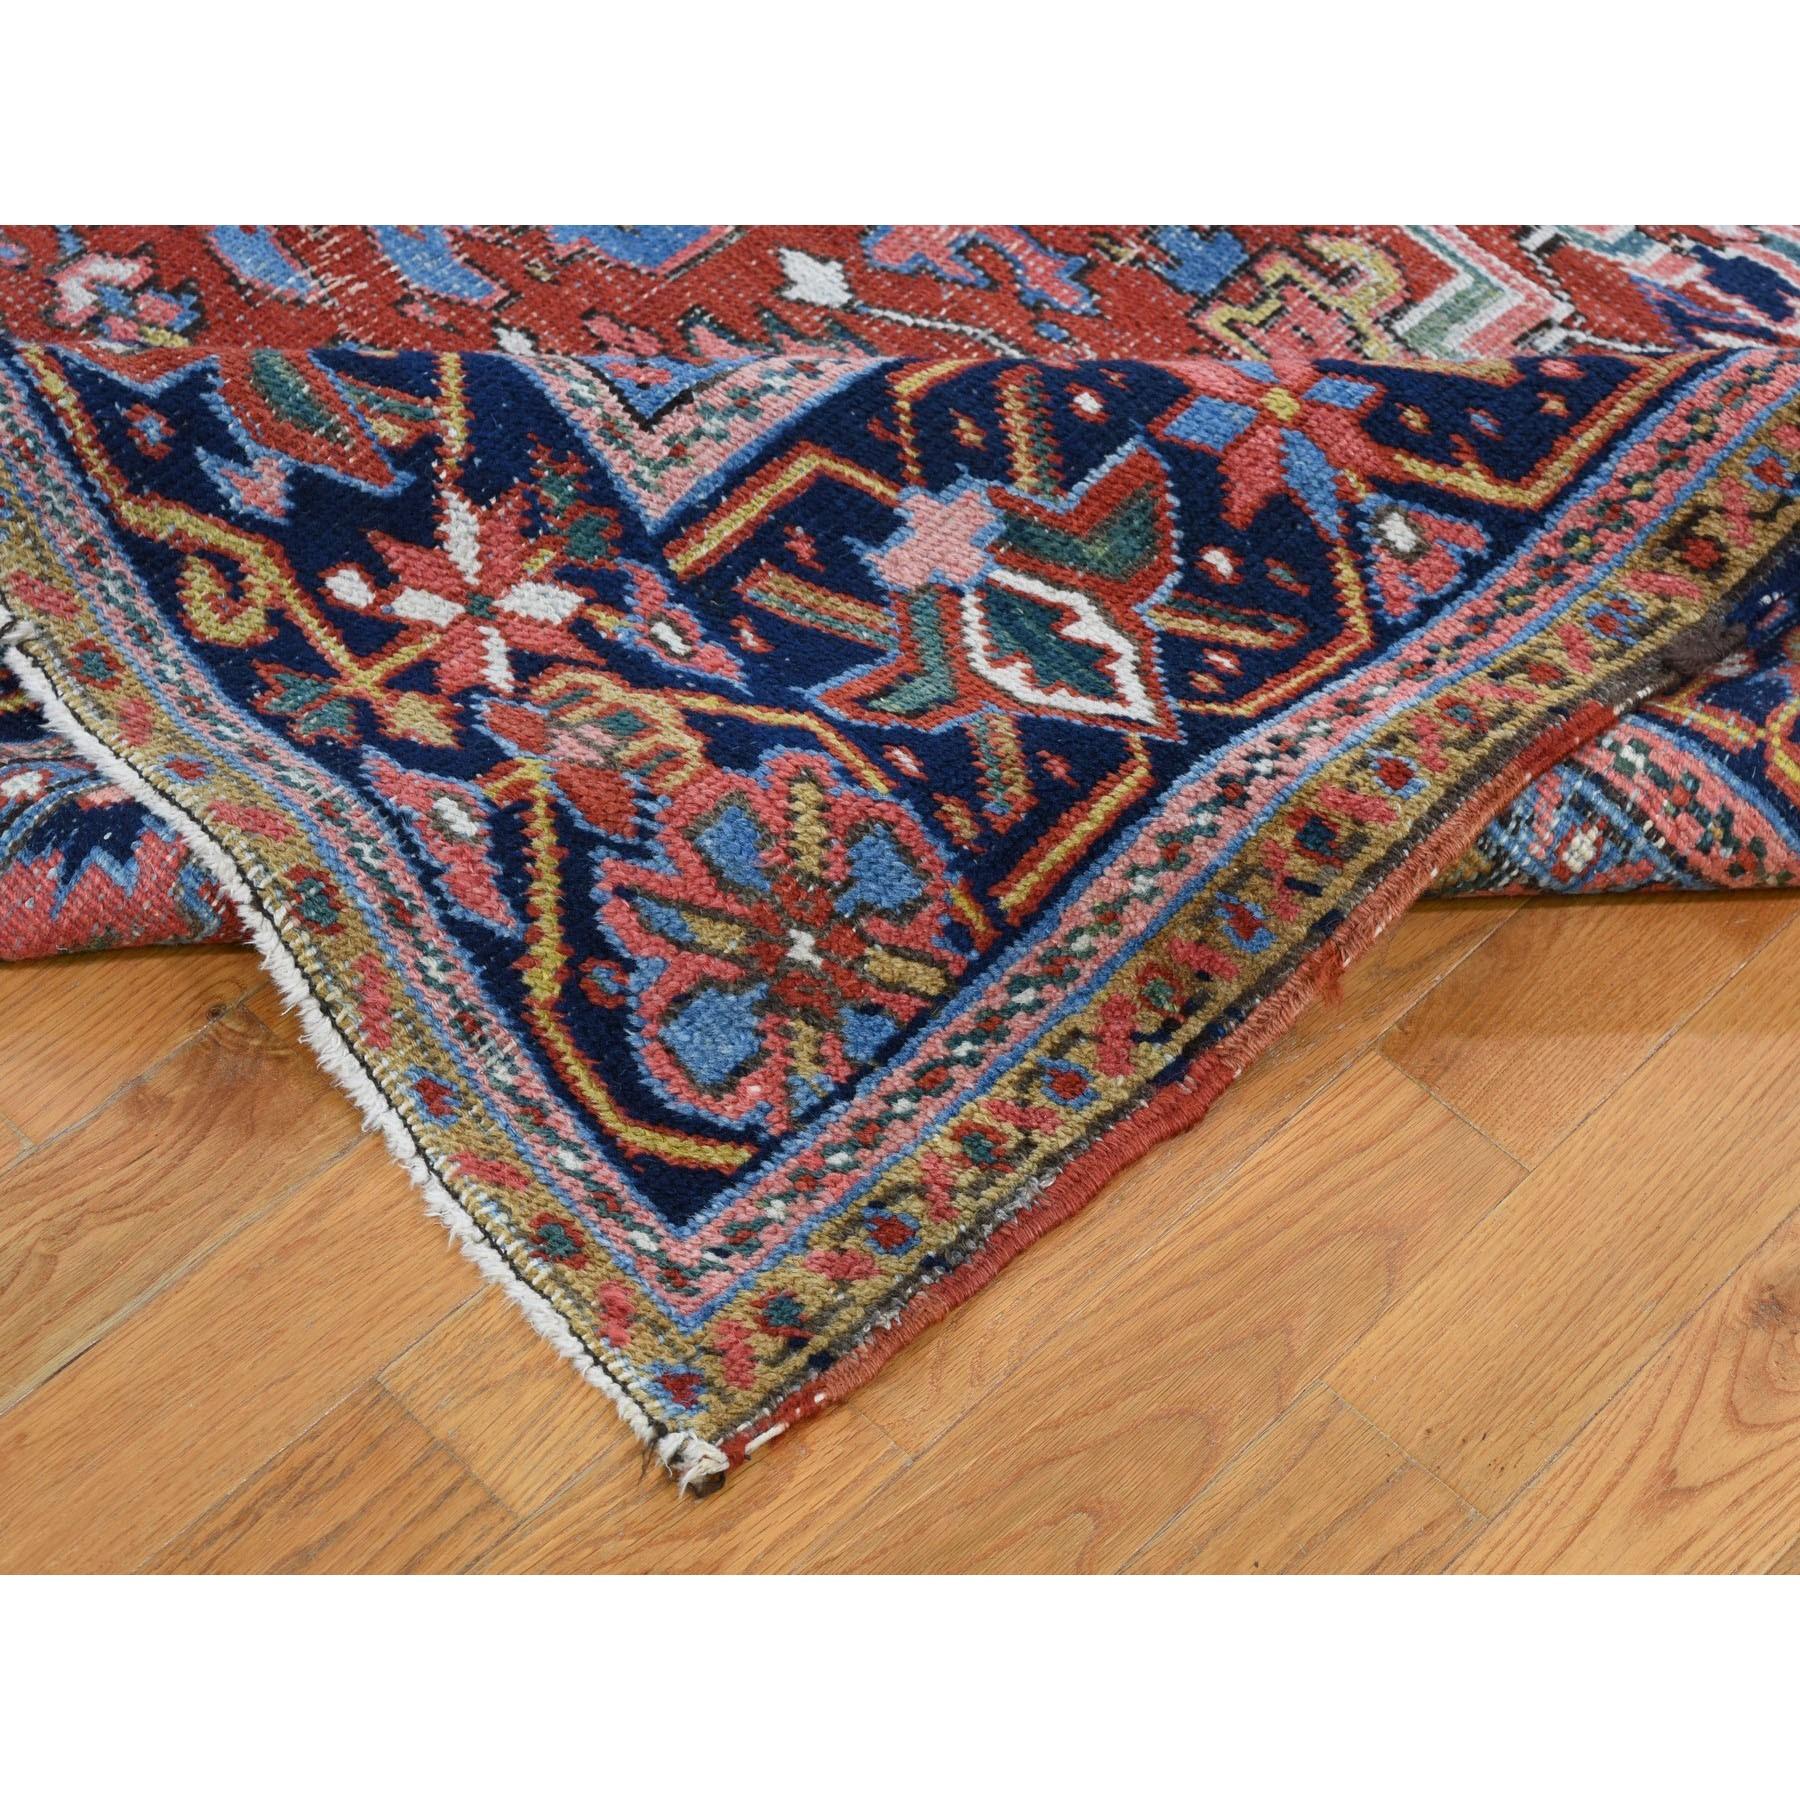 20th Century Antique Persian Heriz Clean And Worn But No Holes Hand Knotted Oriental Rug